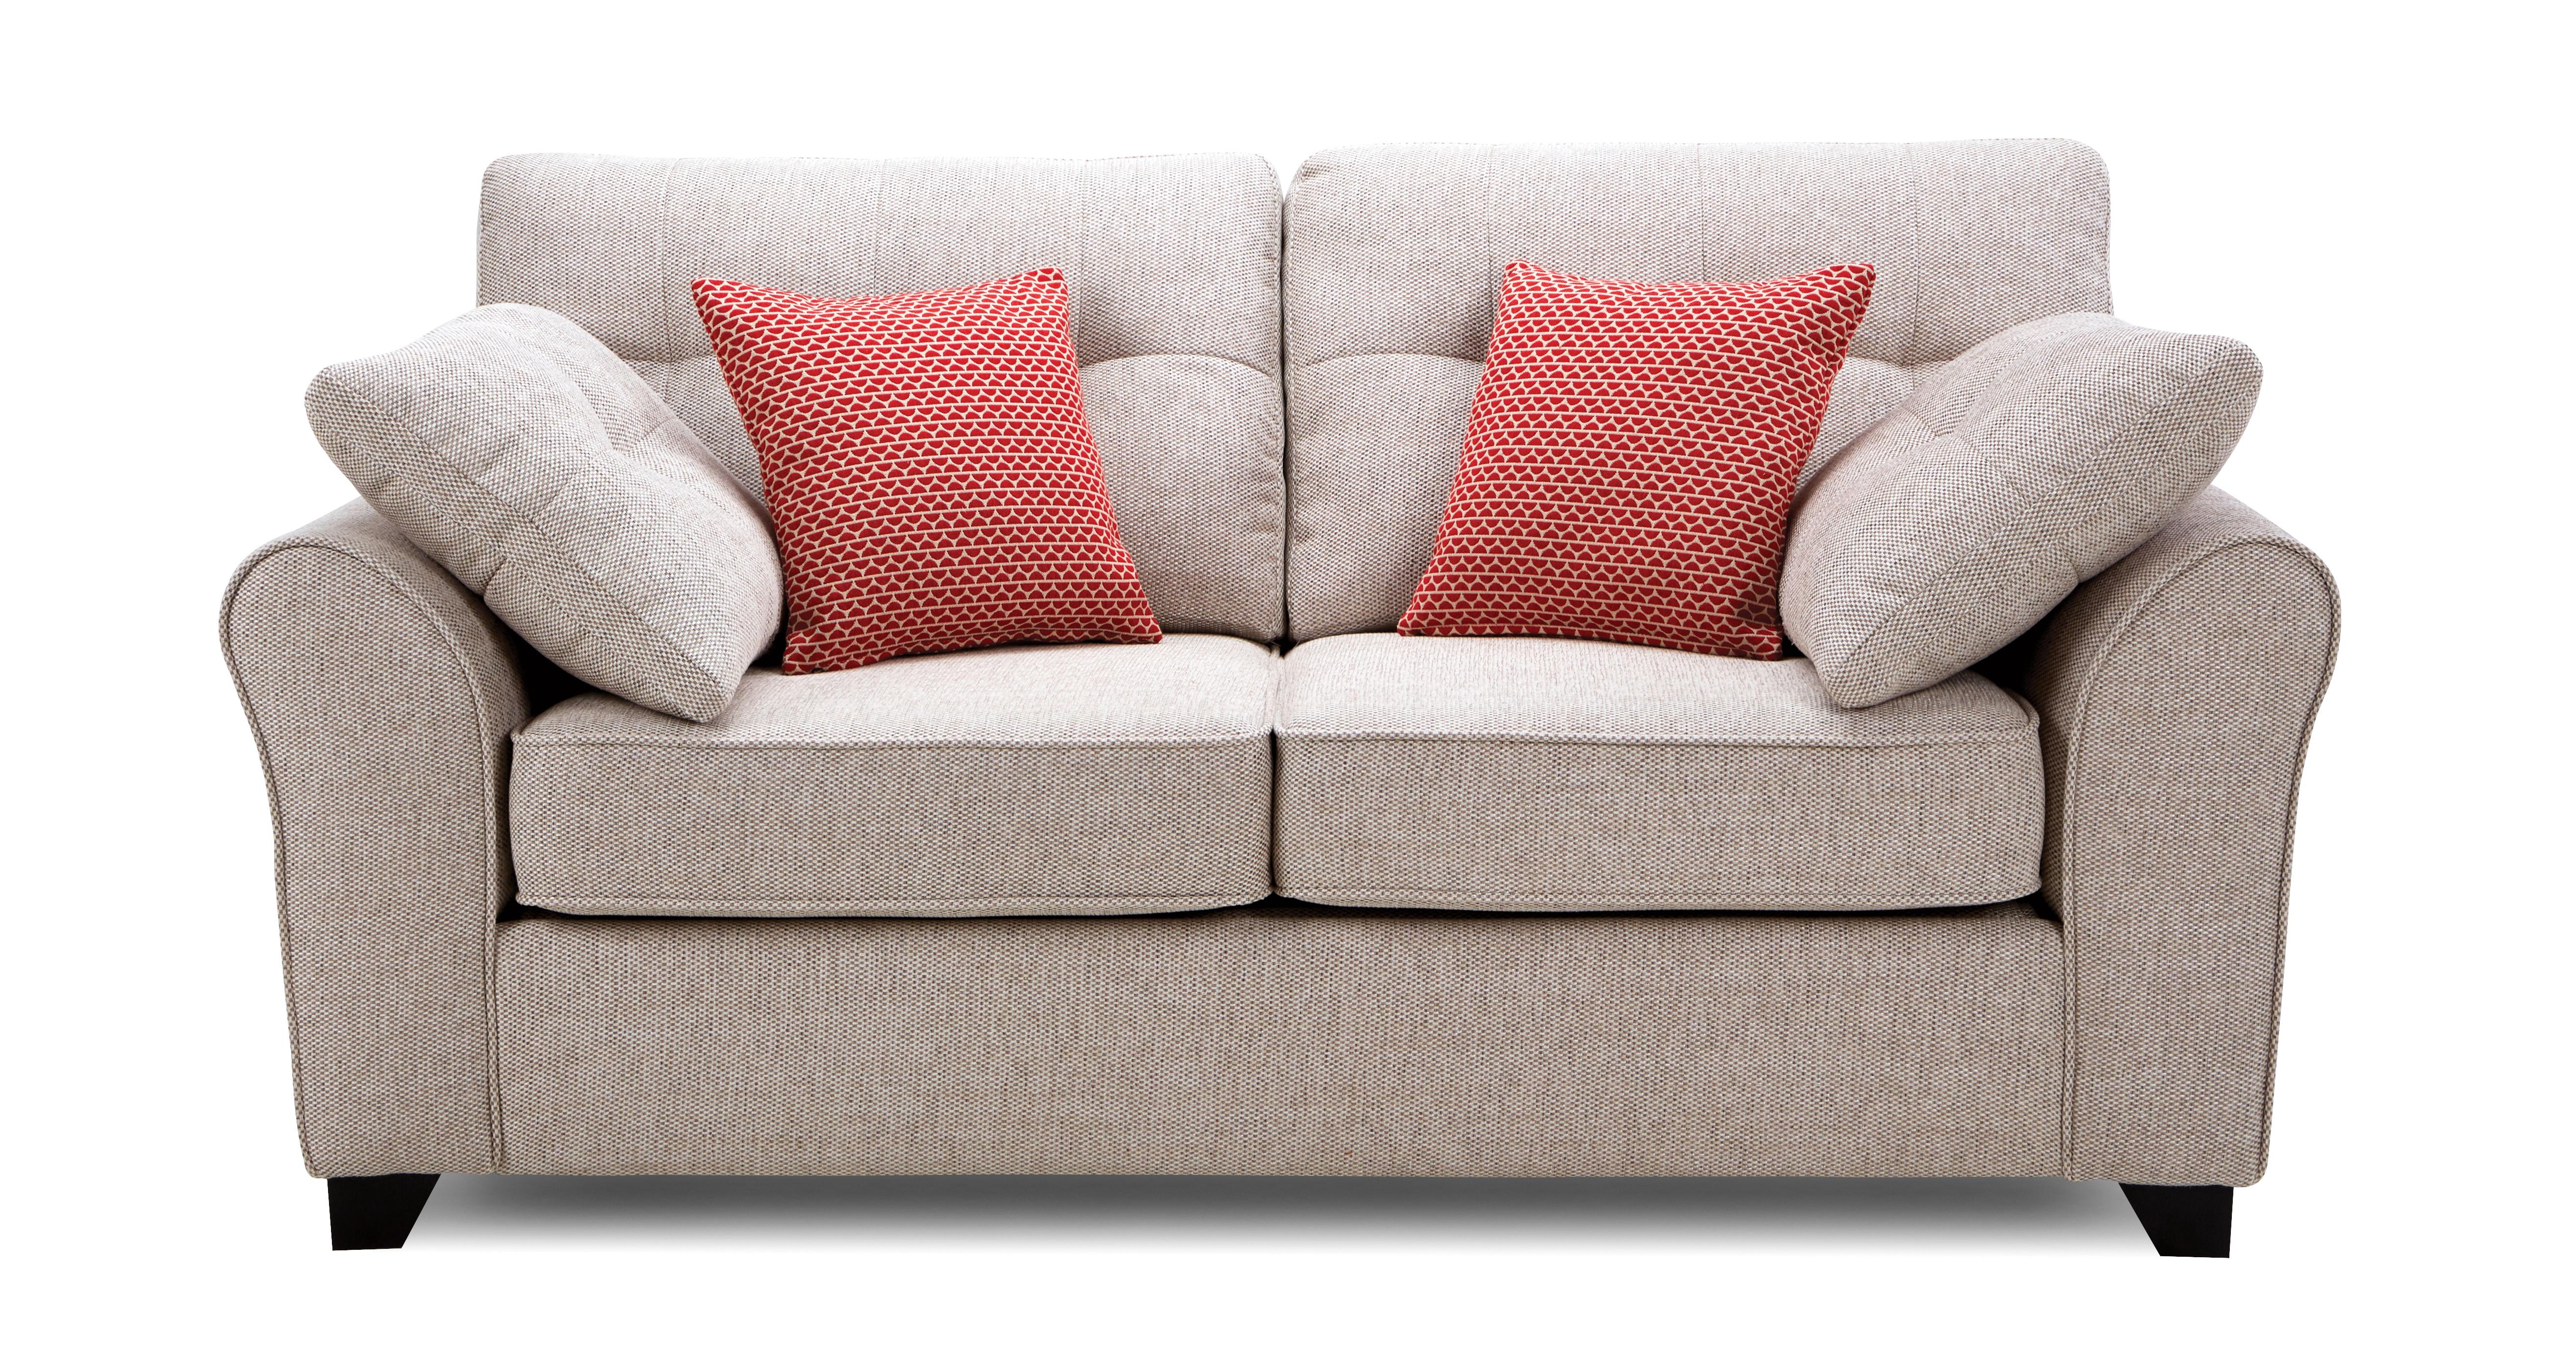 About The Croyde 2 Seater Sofa